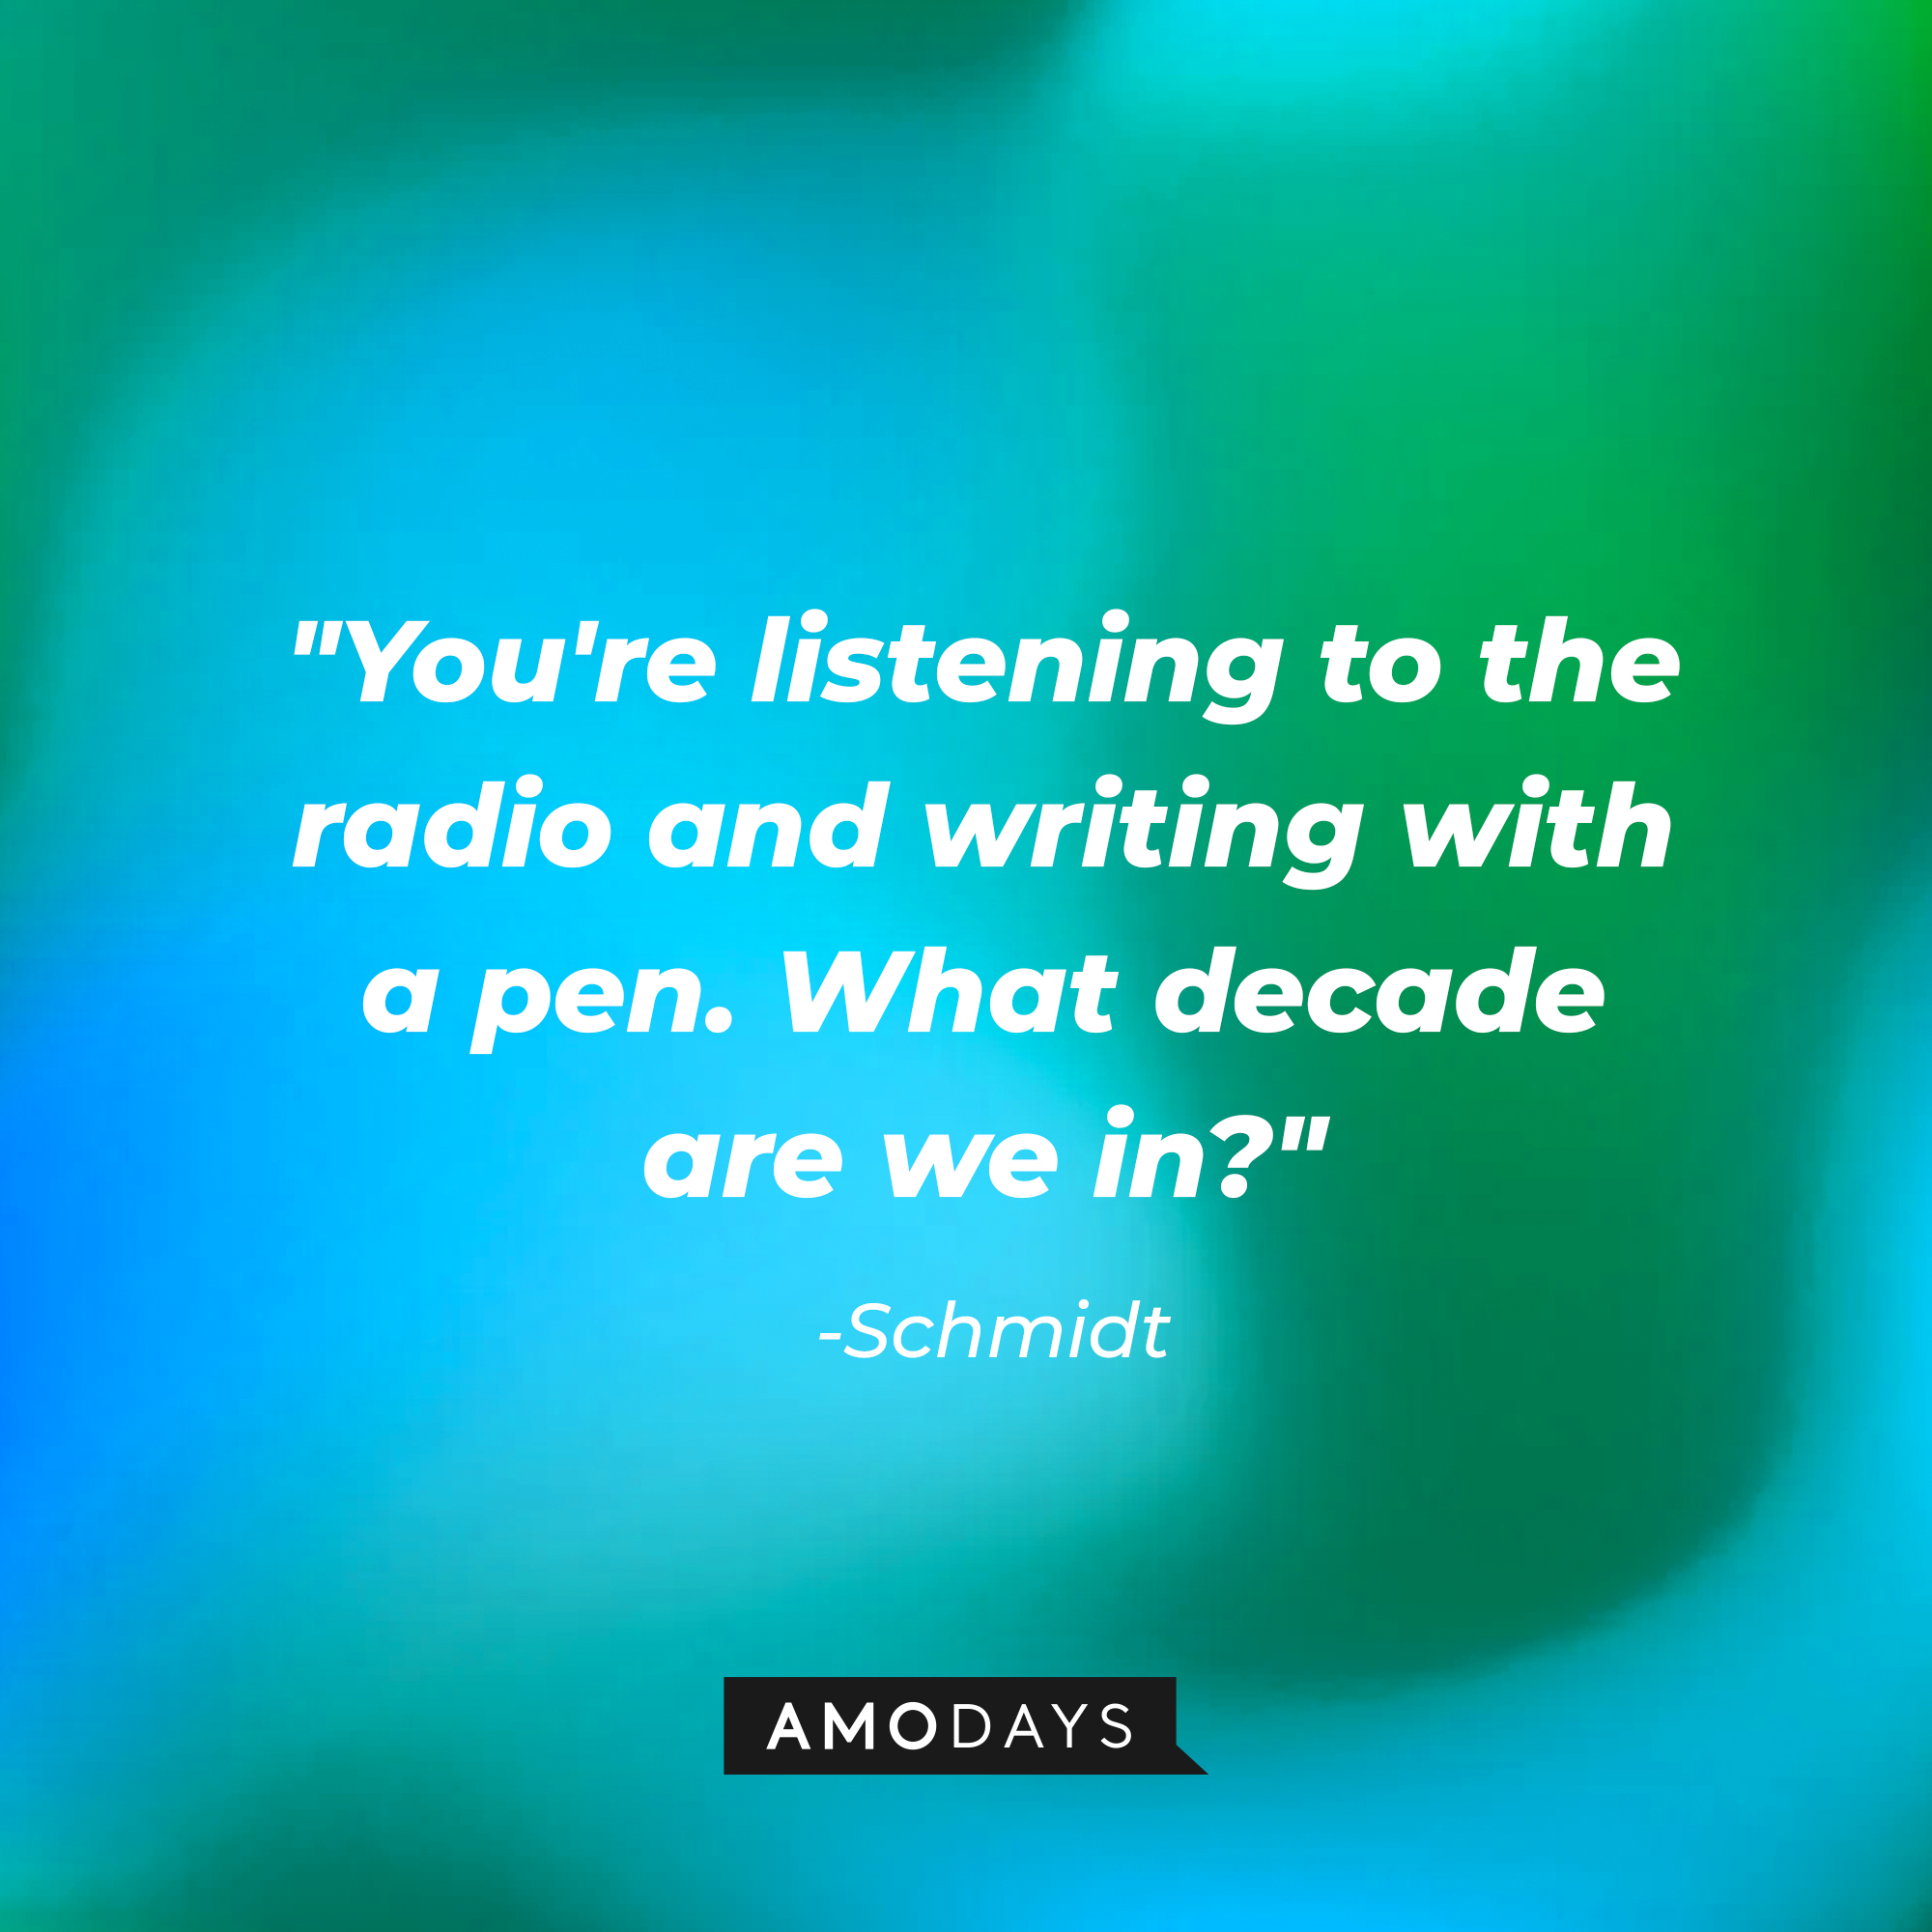 Schmidt's quote, "You're listening to the radio and writing with a pen. What decade are we in?" | Source: Amodays